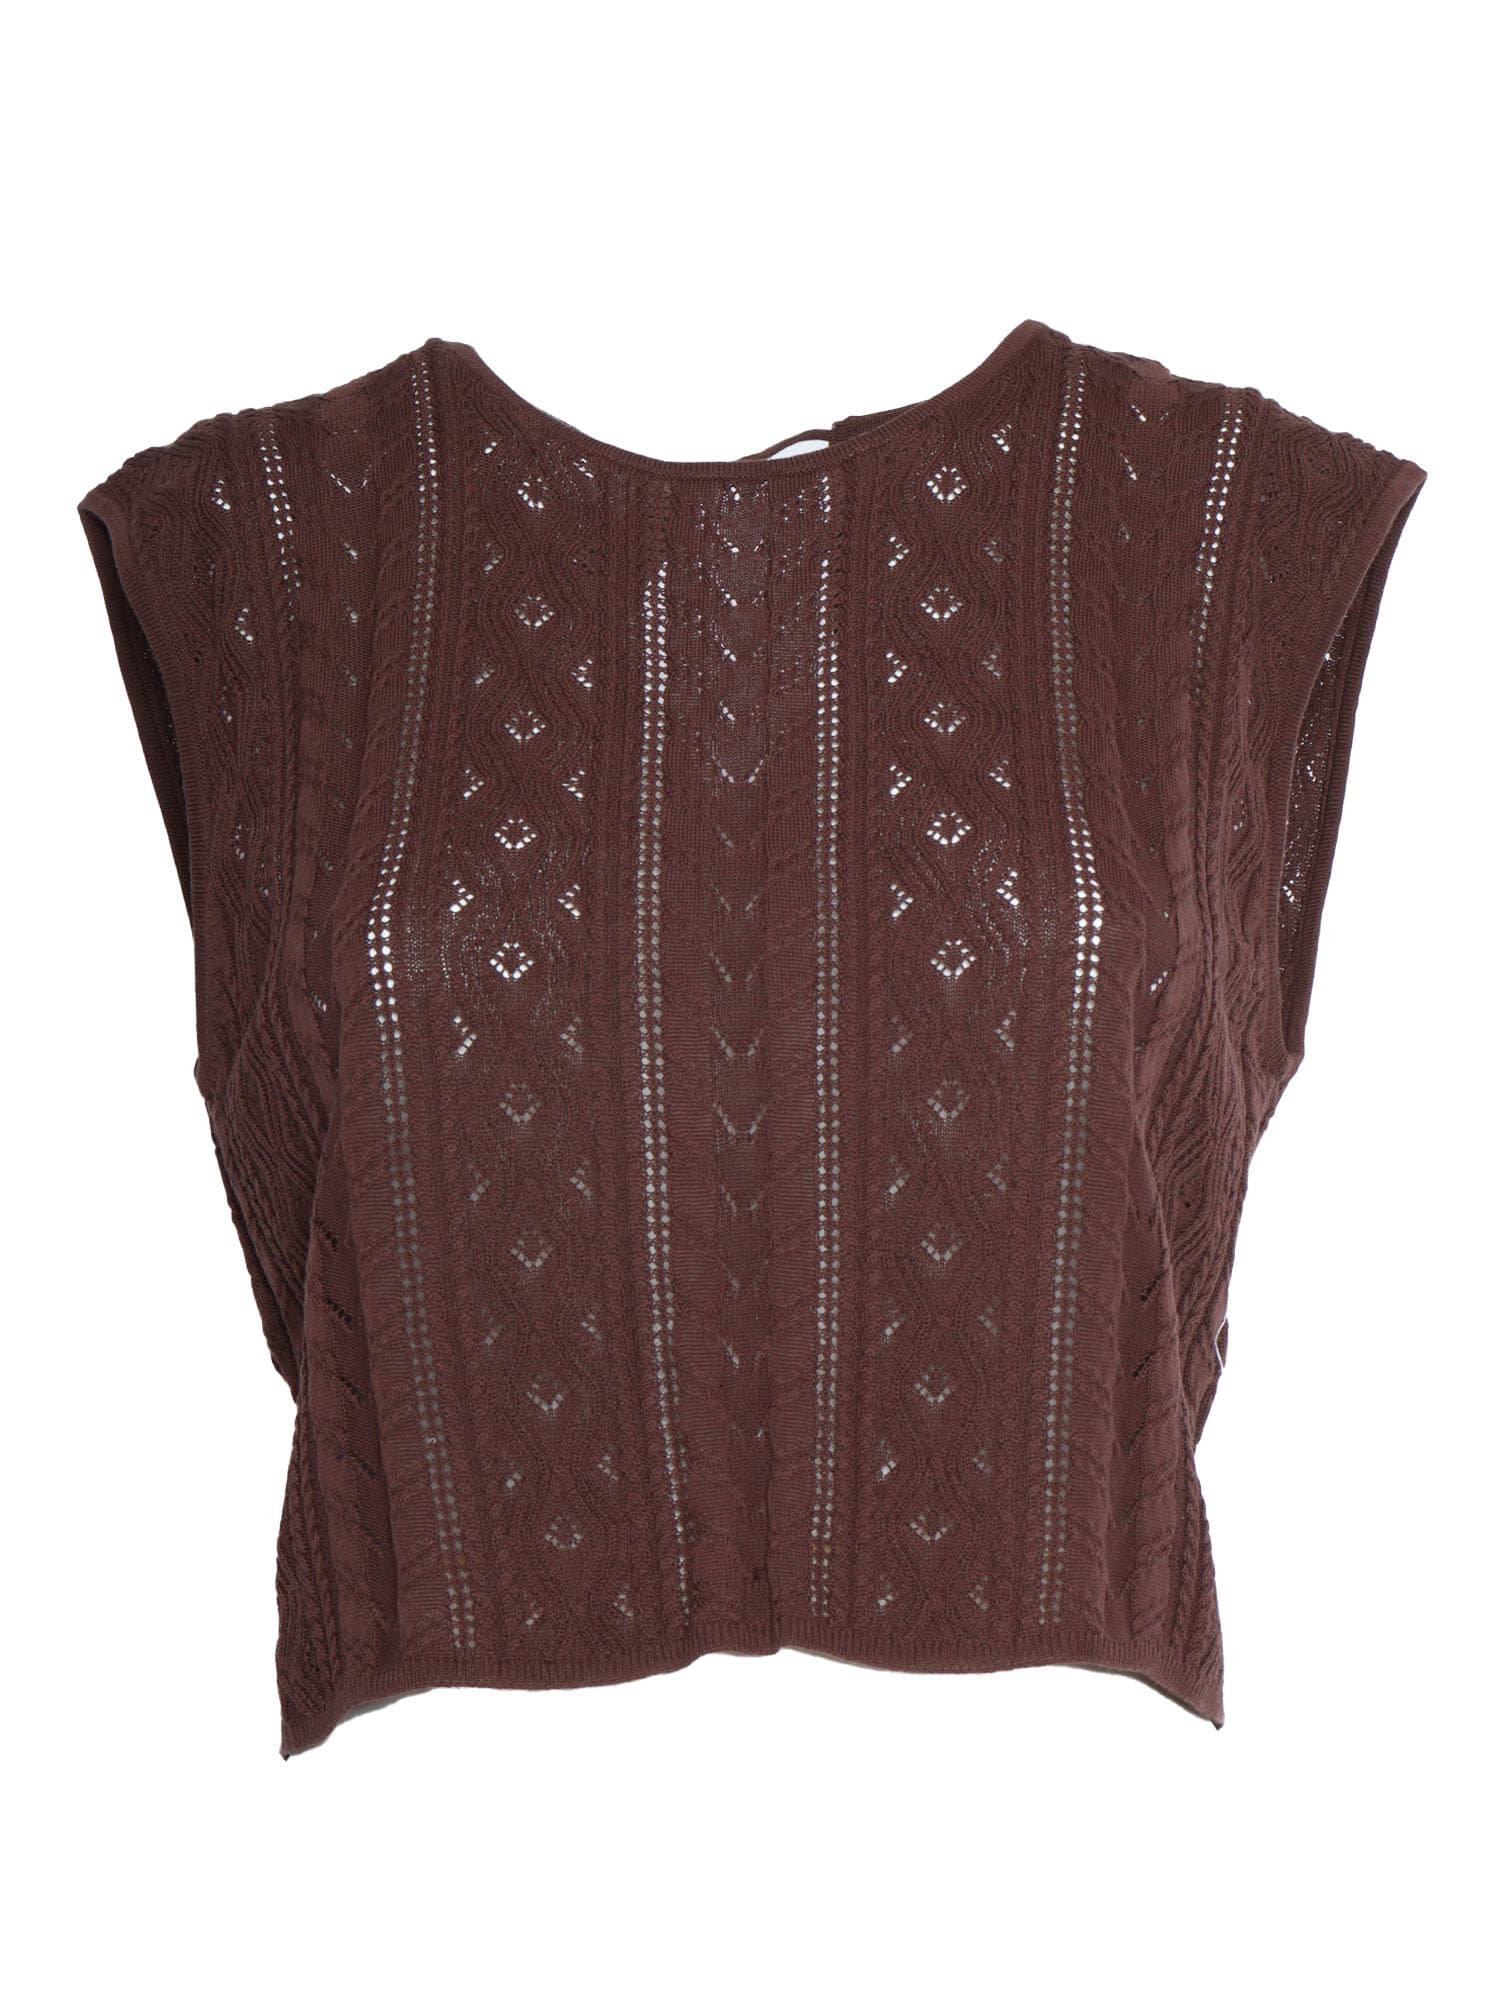 Shop Ballantyne Brown Perforated Top